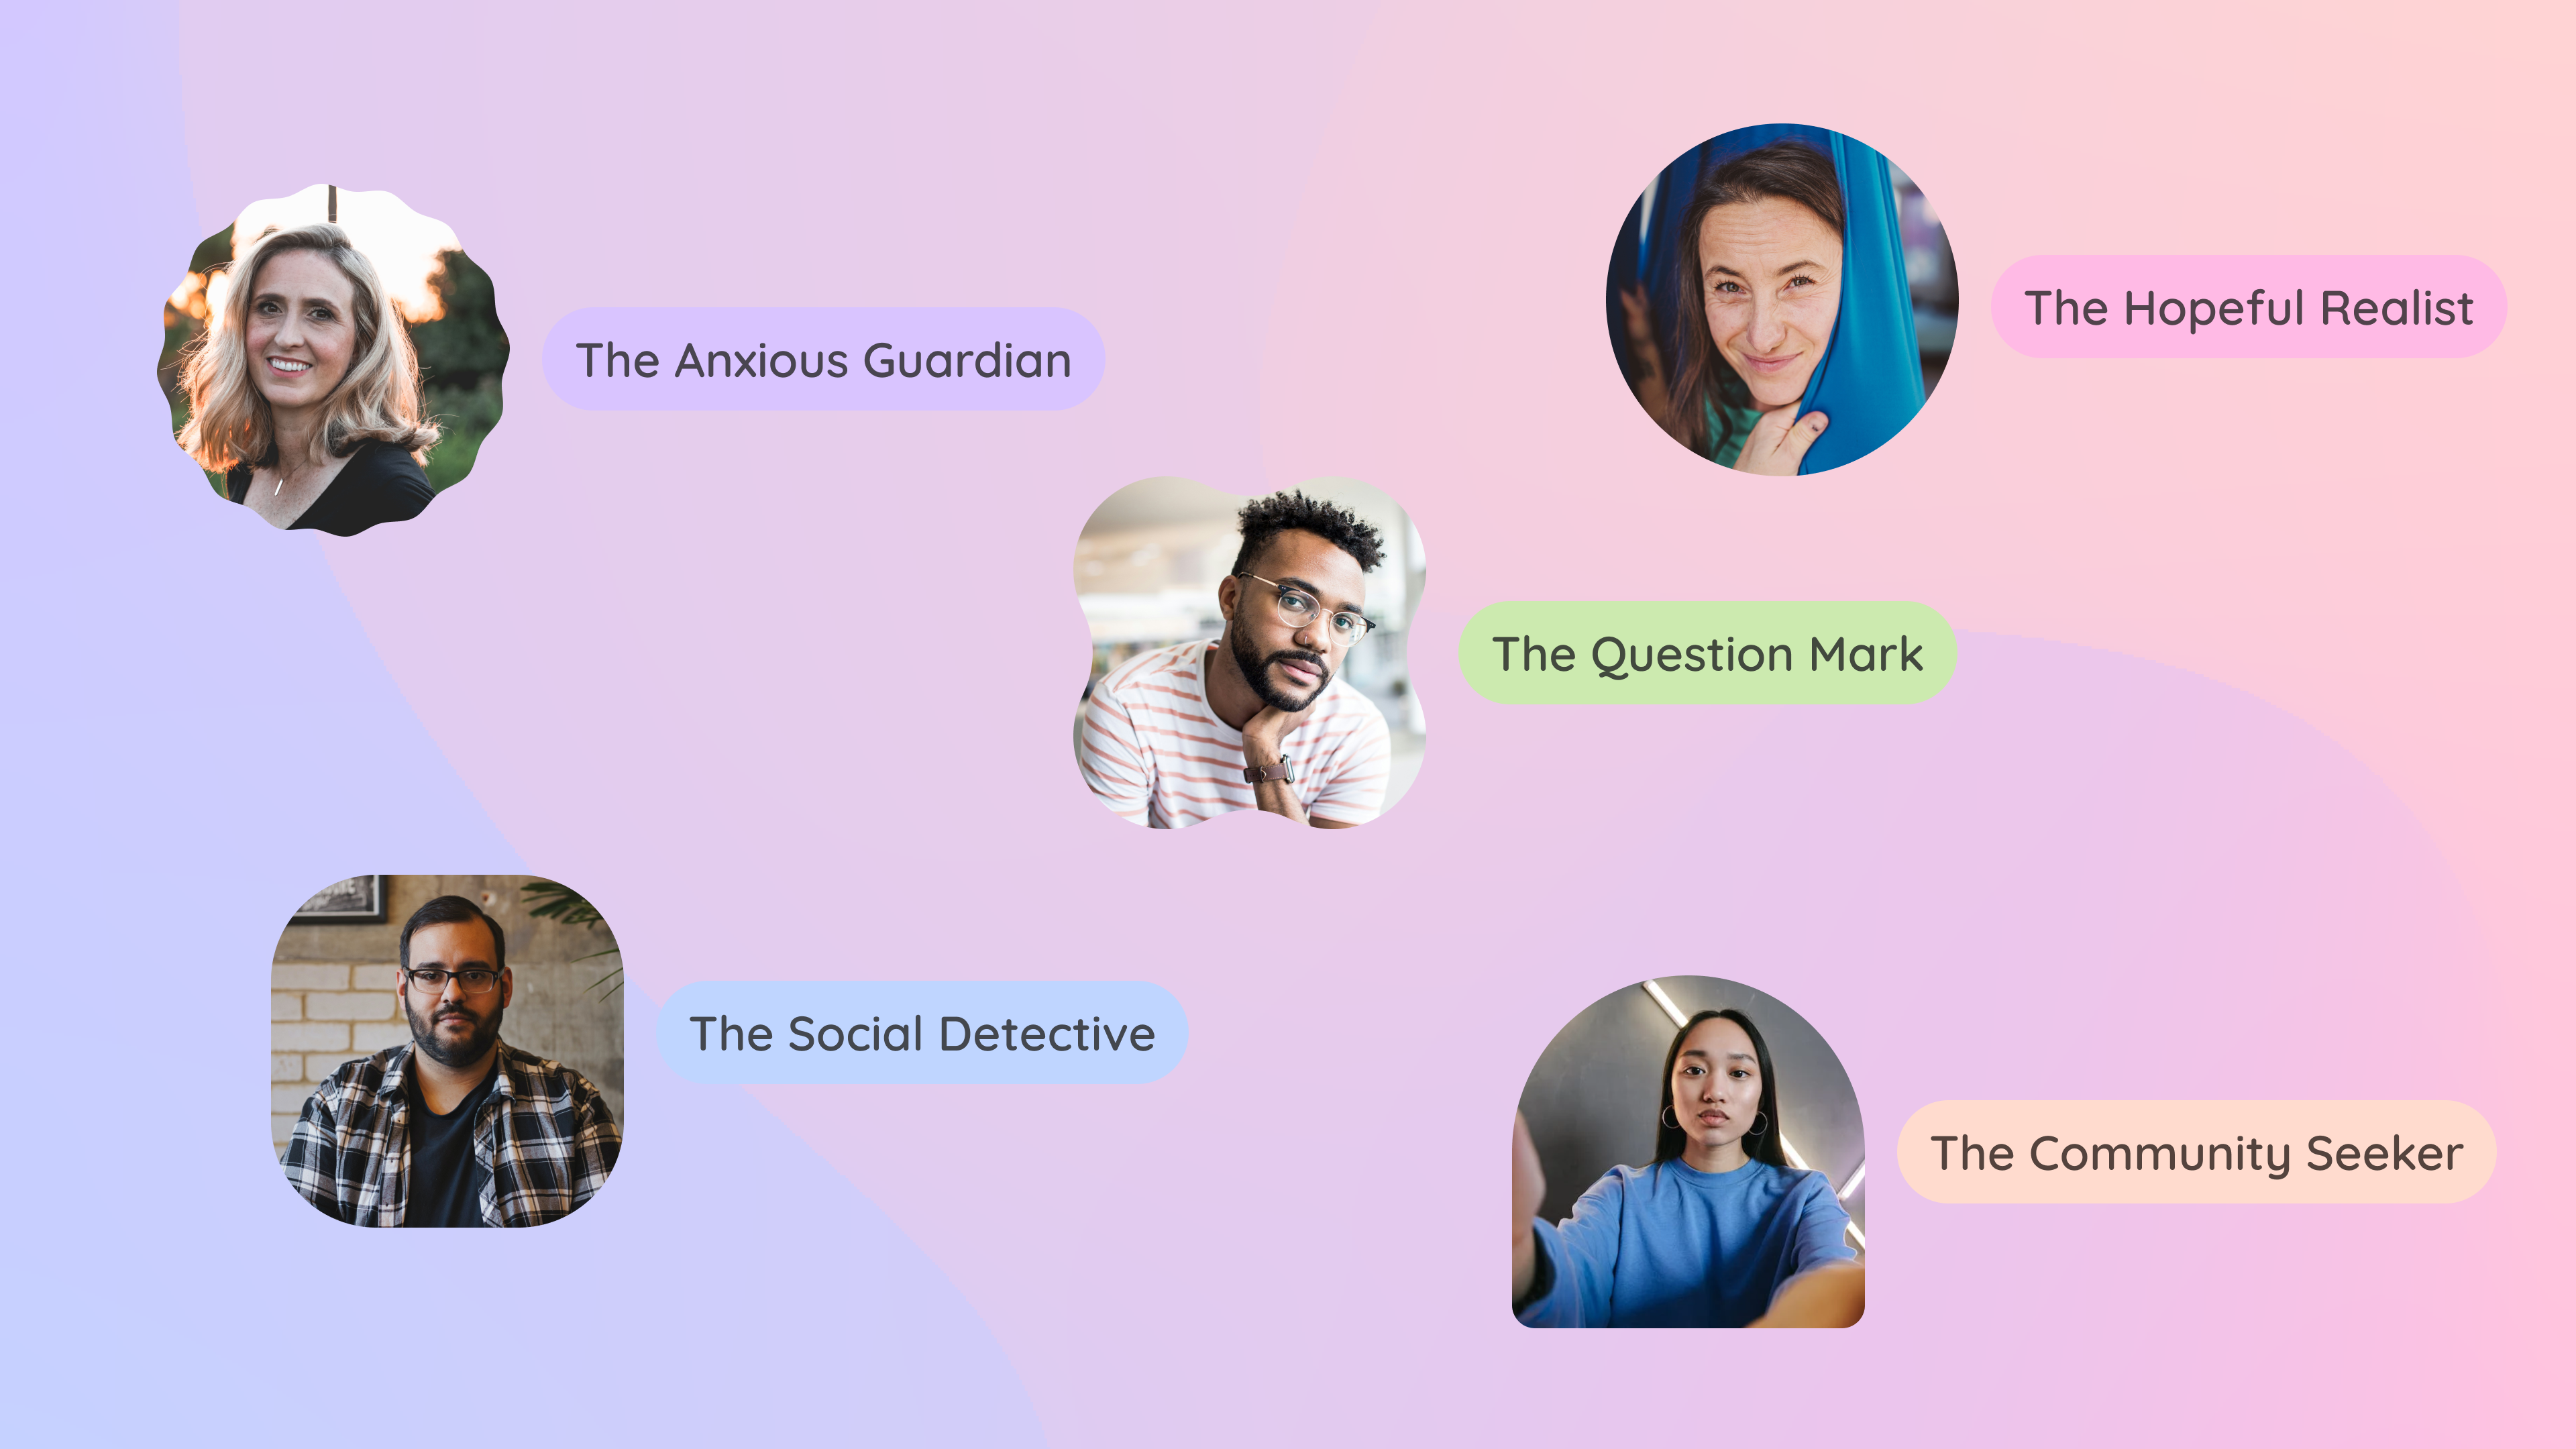 An image showing the five different personas created for this project